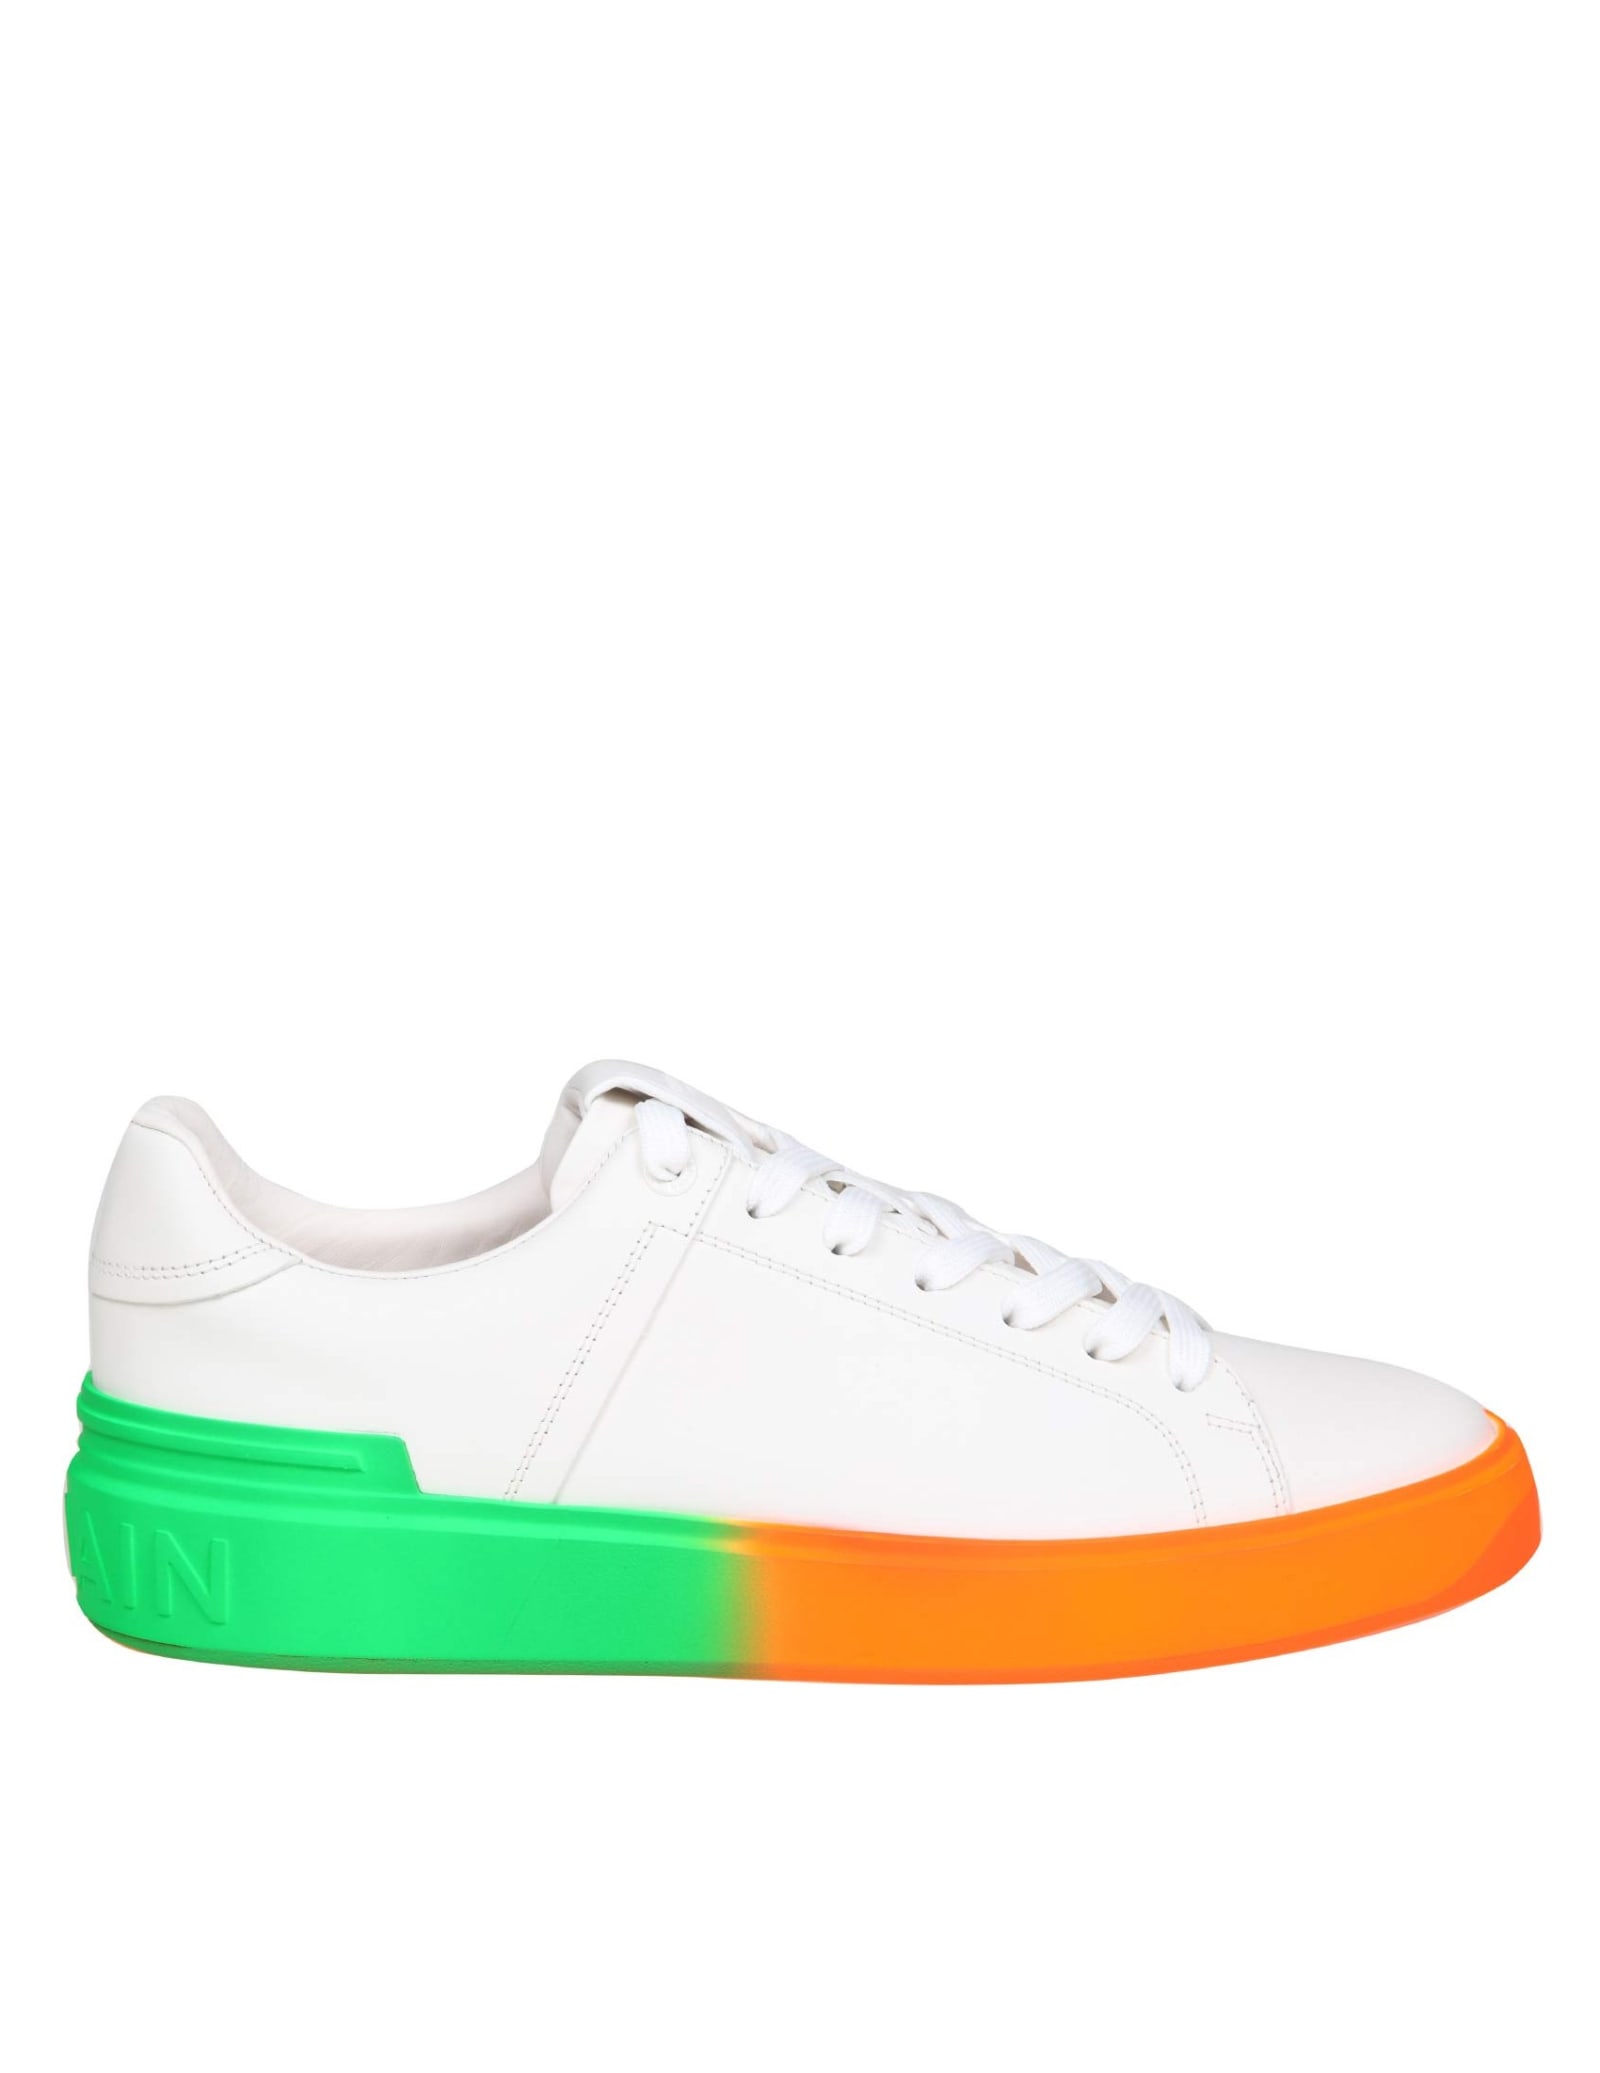 Balmain B Court Sneakers In White Leather With Two-tone Sole